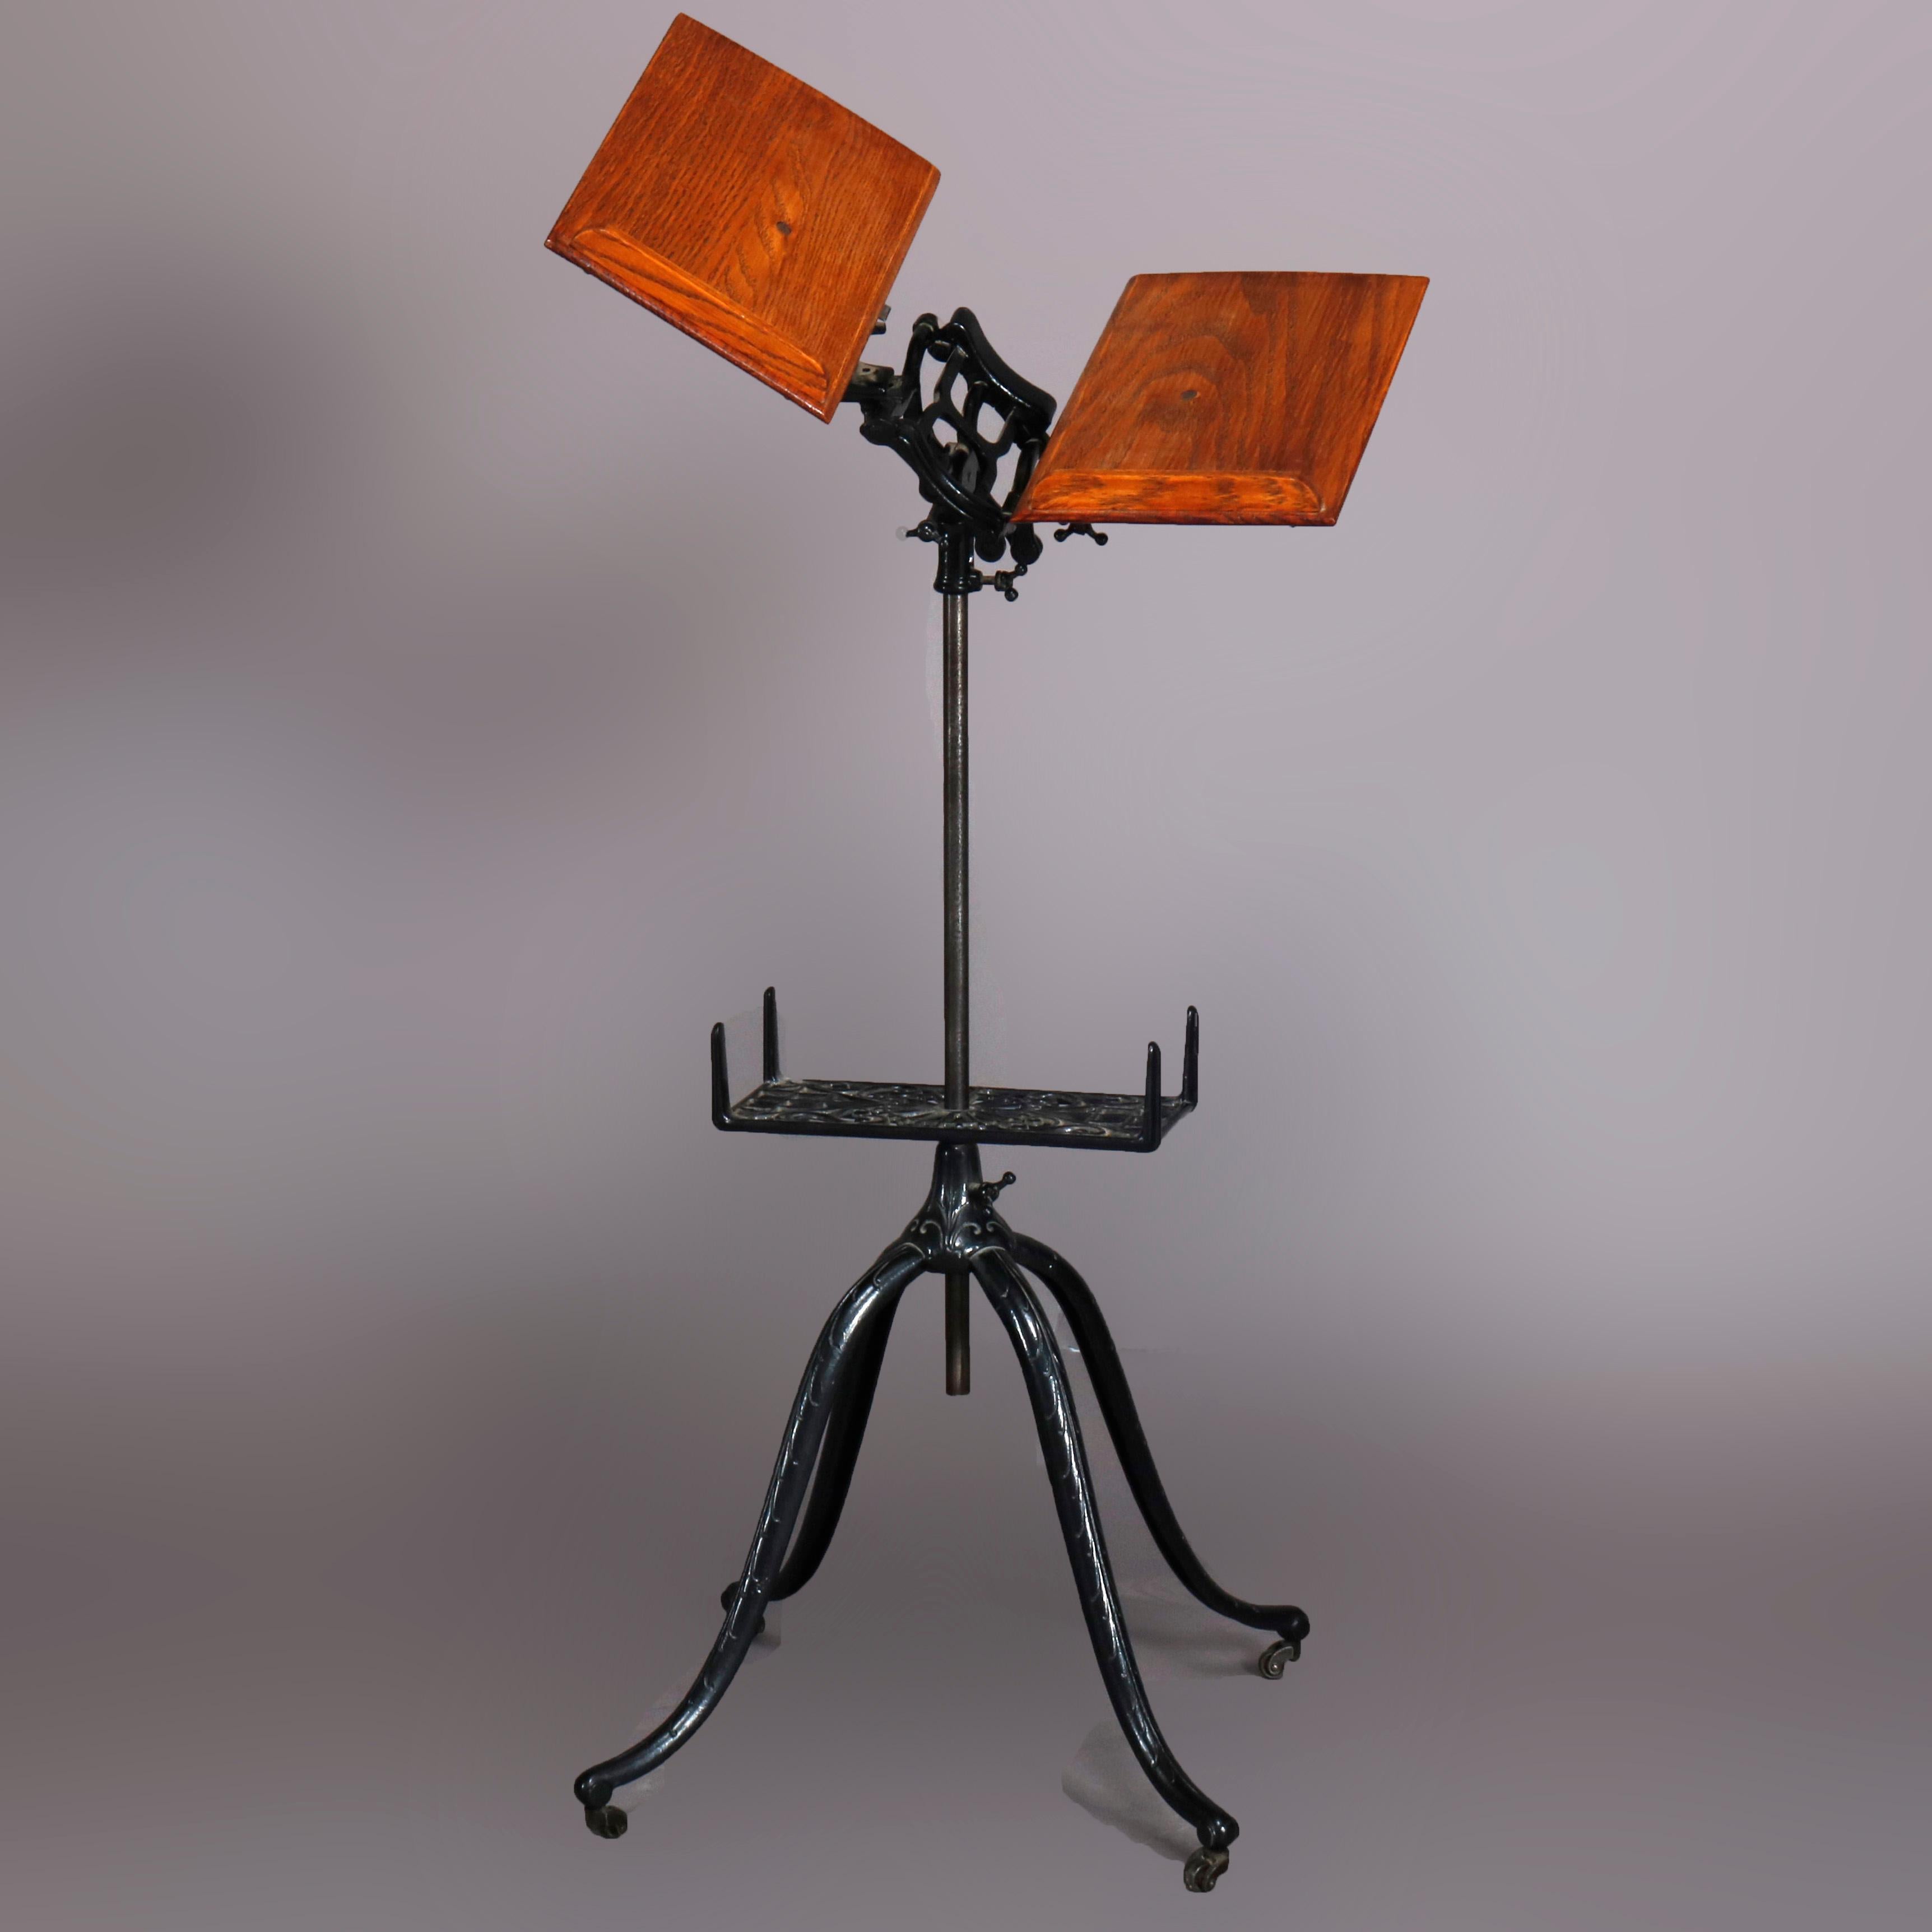 An antique Arts & Crafts library or parlor dictionary book stand offers cast iron quadrapod base with cabriole legs and pierced cast foliate lower shelf surmounted by adjustable display, seated on casters, circa 1920.

***DELIVERY NOTICE – Due to